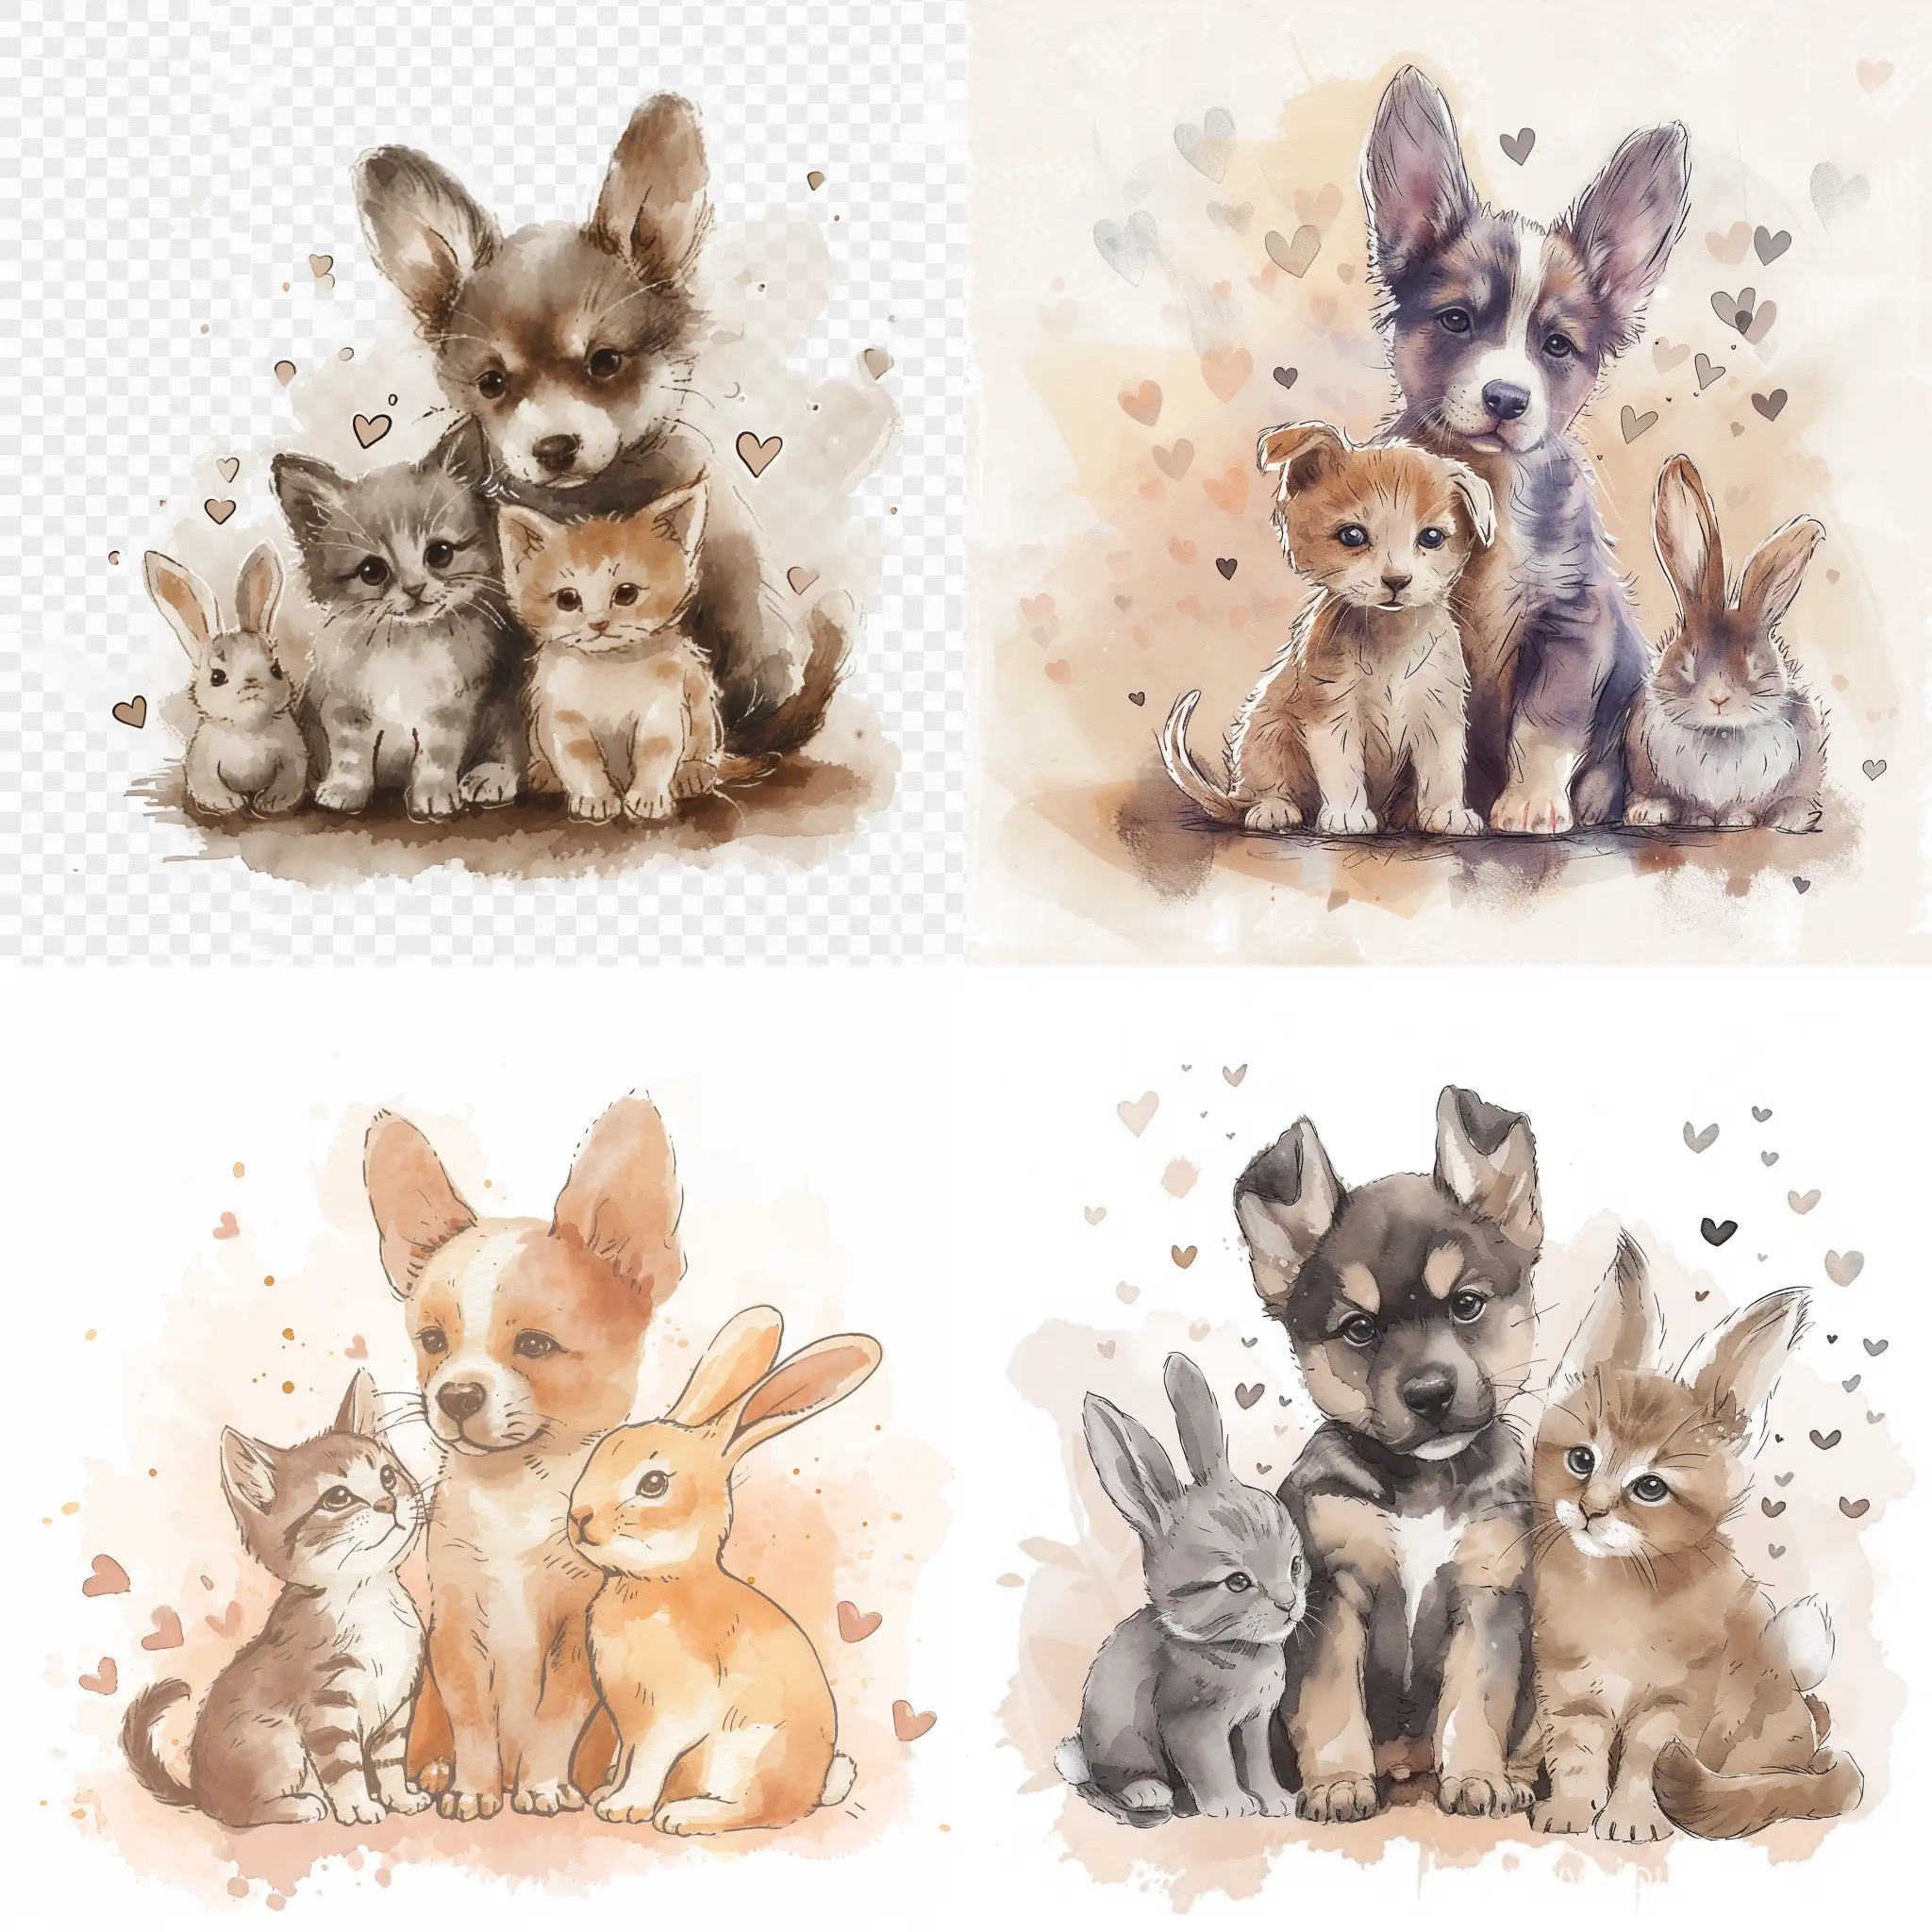 Illustrate a PNG image with a transparent background showing a watercolor painting of a small group of pets - a puppy, a kitten, and a bunny - sitting together. They should be rendered in soft watercolor tones with a splash of hearts around them, suggesting a gentle and artistic virtual pet app.